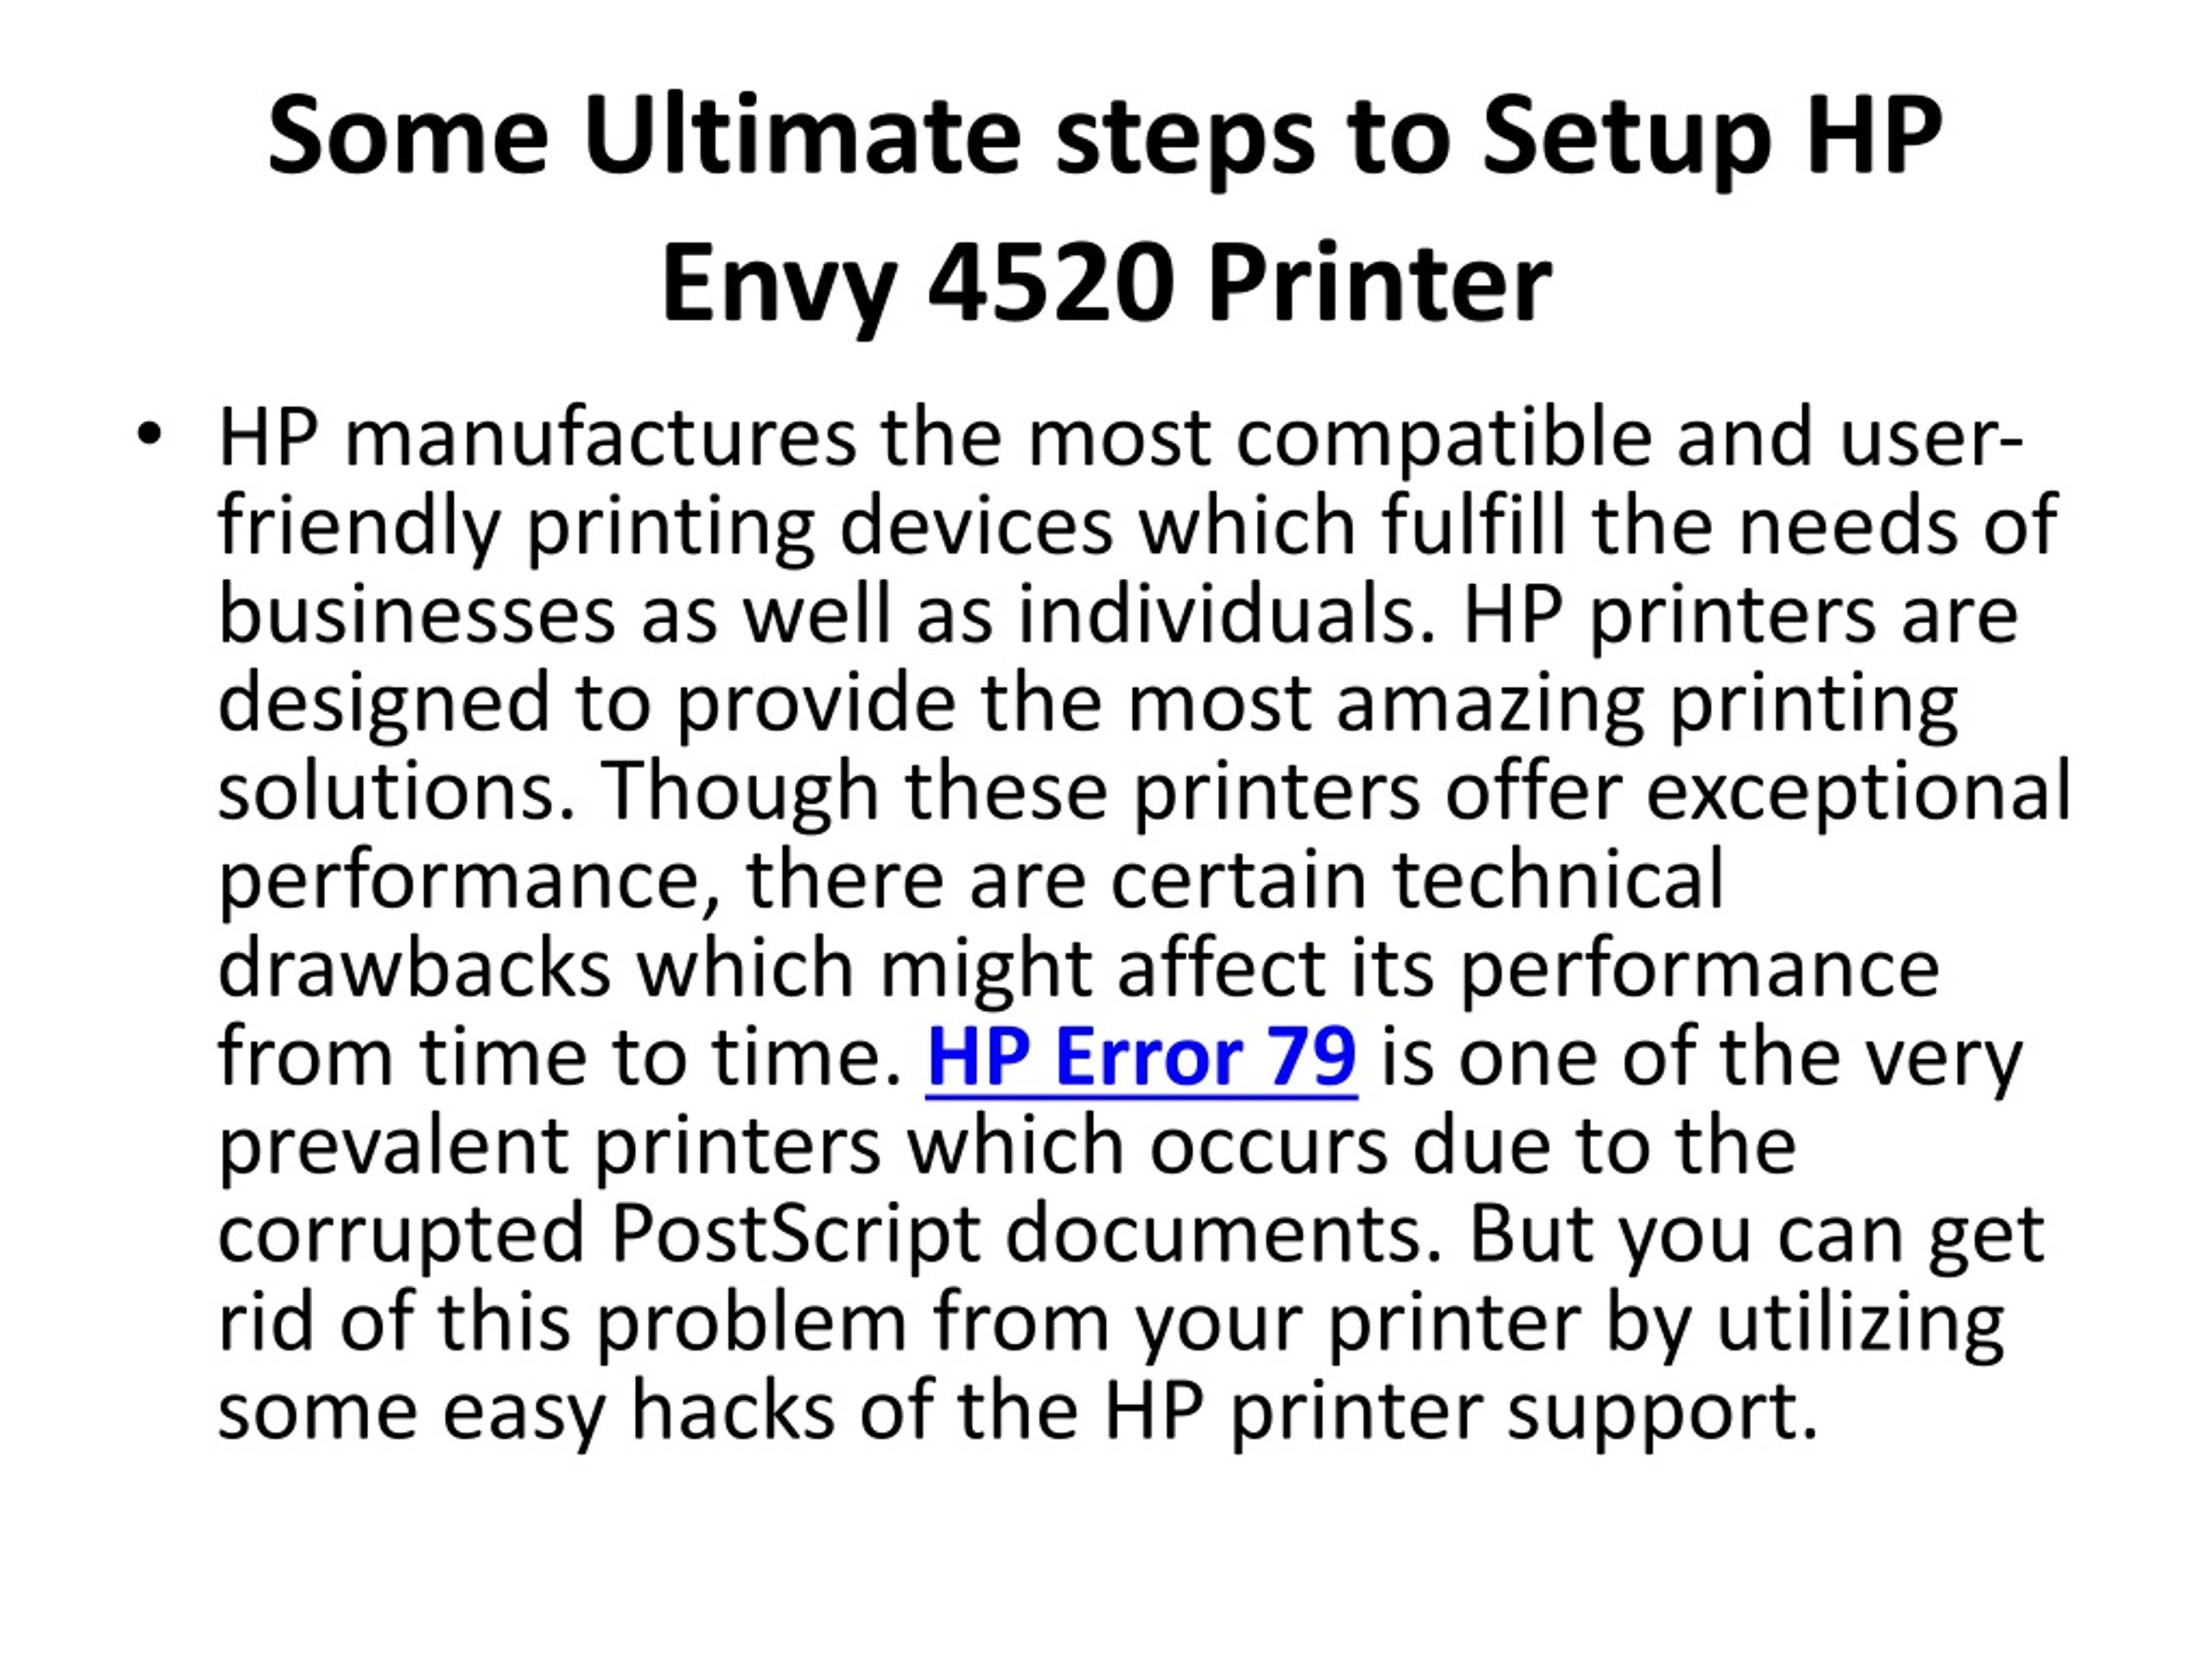 Ppt Some Ultimate Steps To Setup Hp Envy 4520 Printer Powerpoint Presentation Id8412107 5625